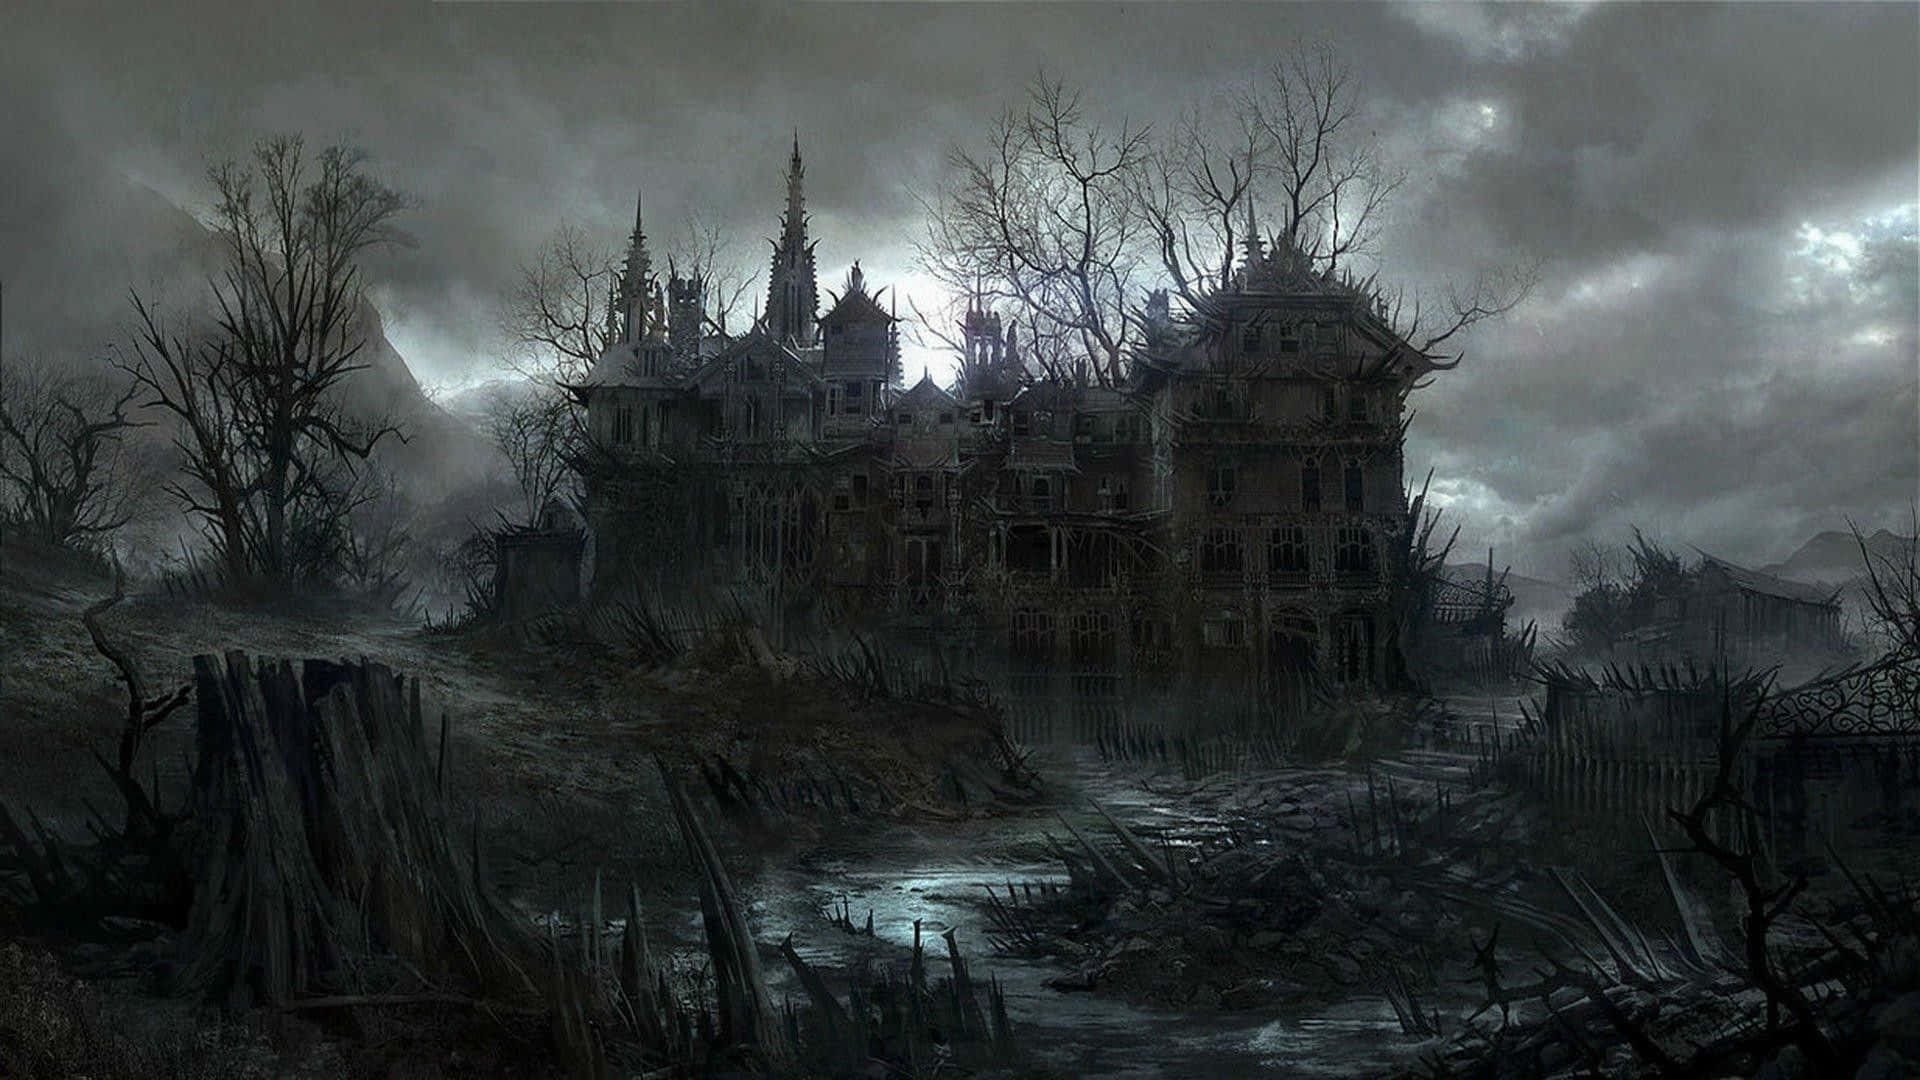 Download A Dark And Spooky Castle With Trees And A River